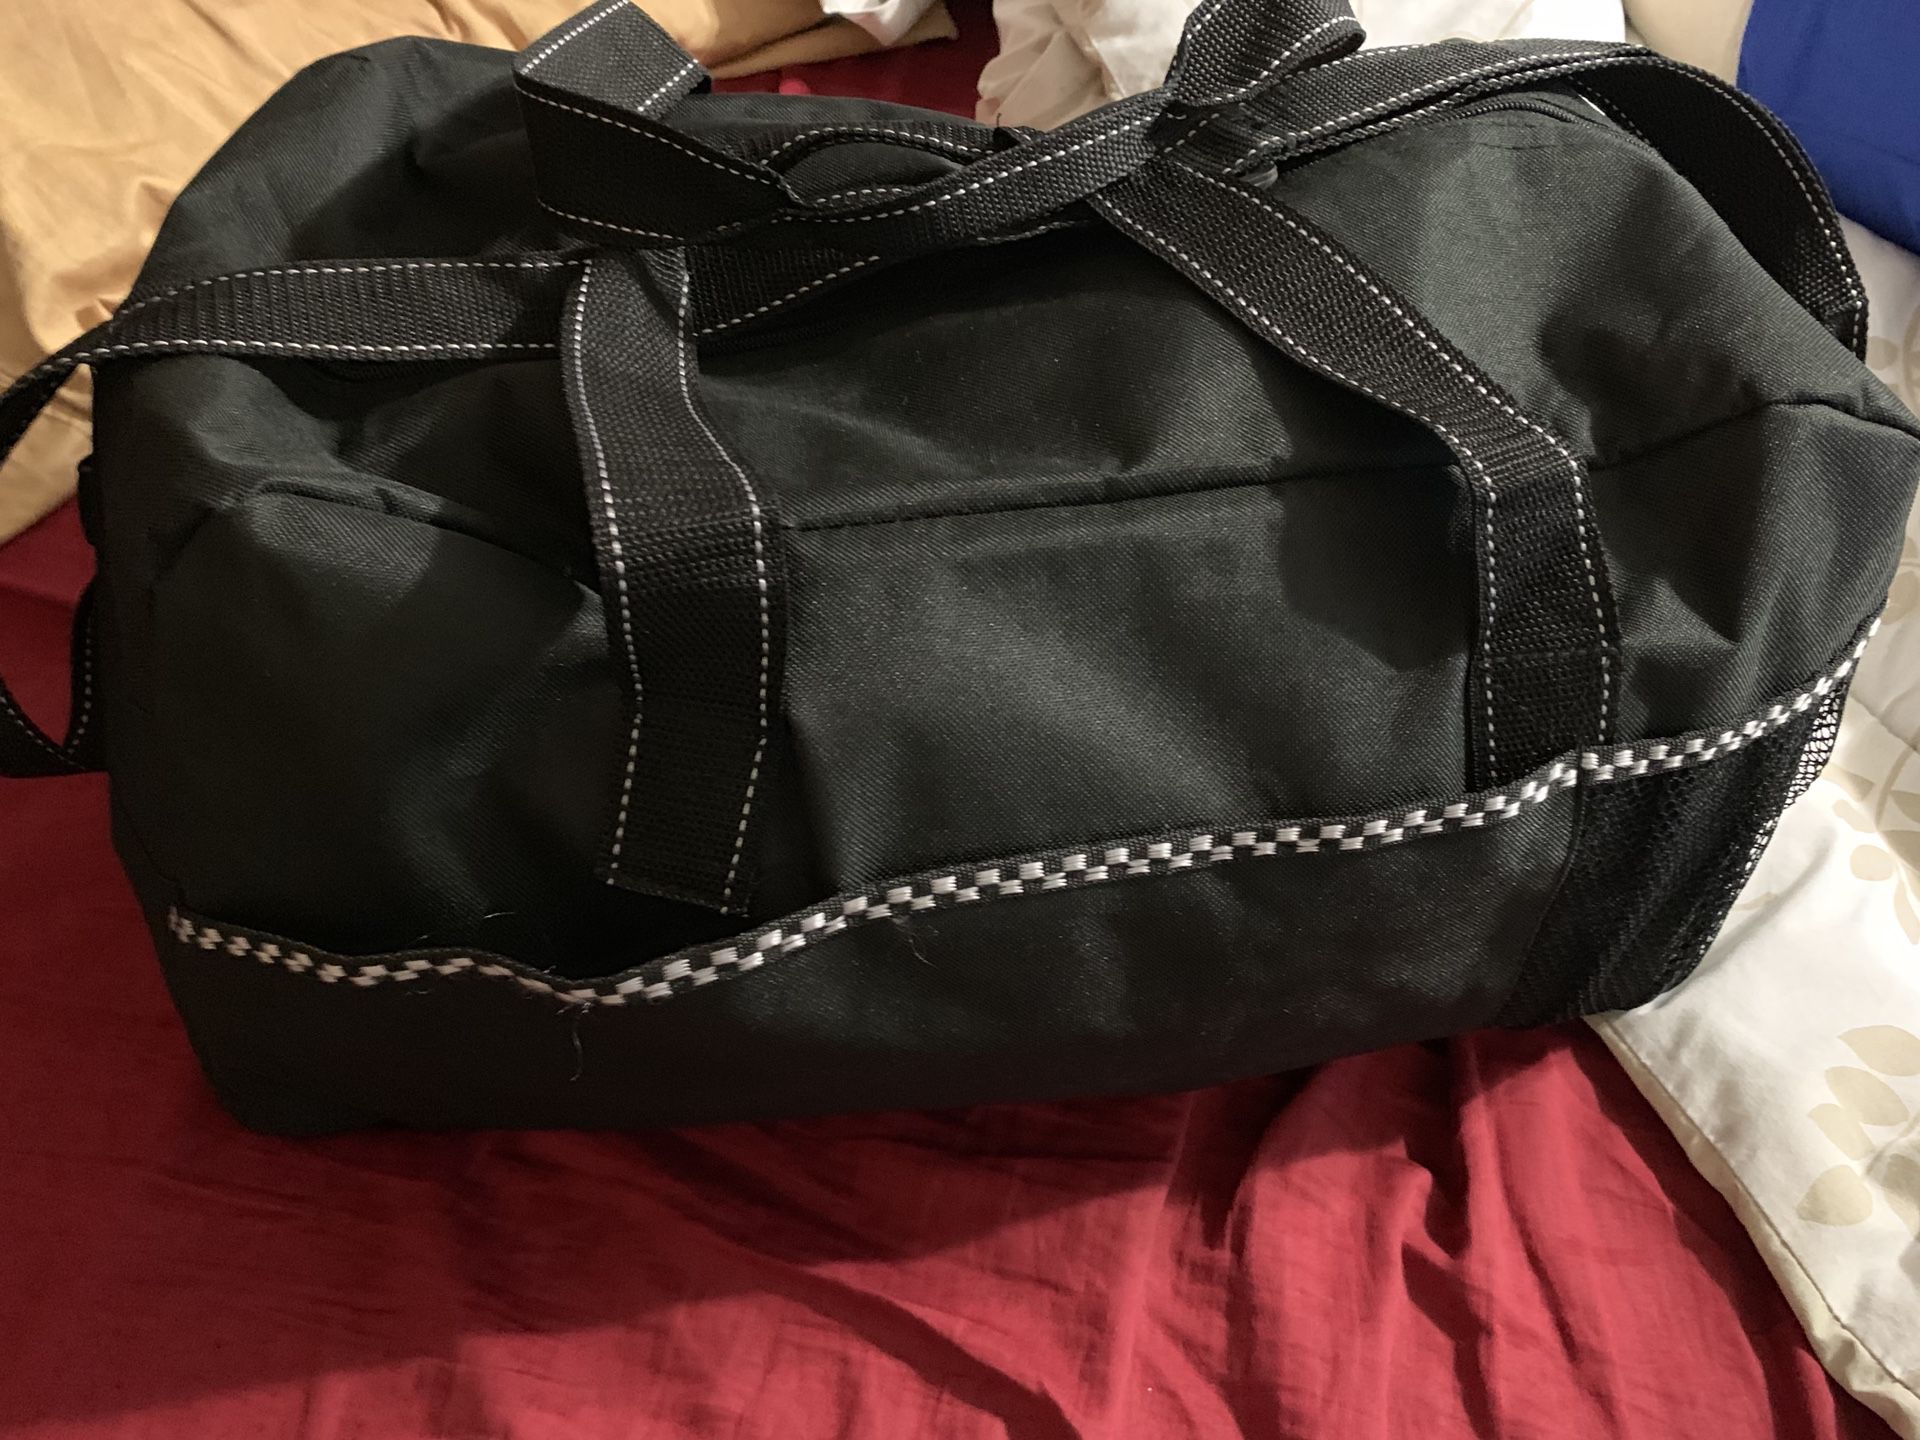 Duffle bag for sale $10